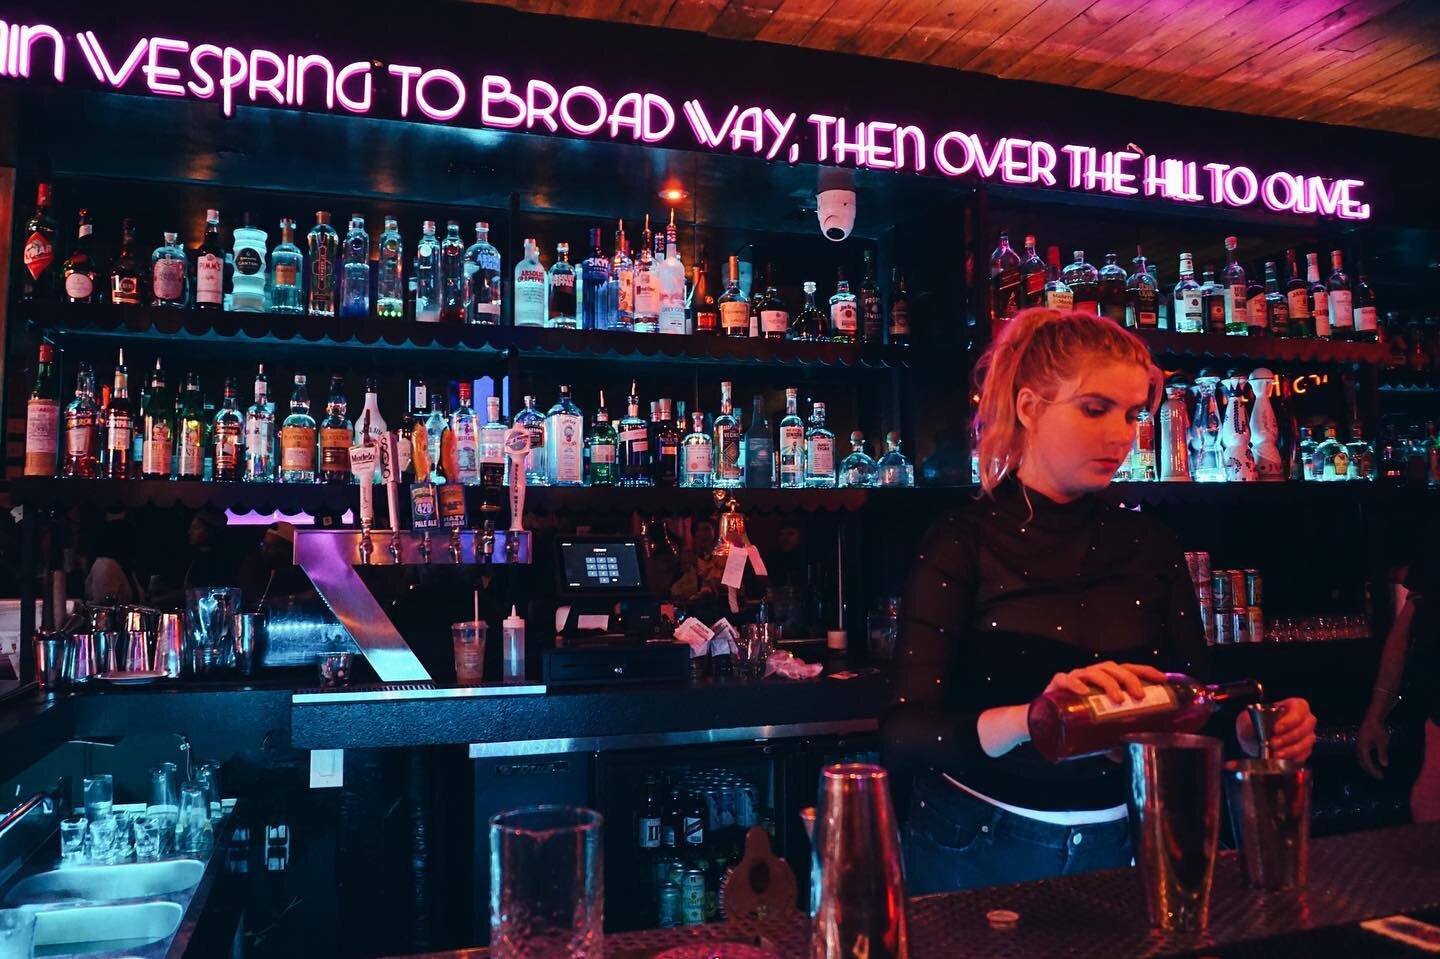 Top off your Monday with a night cap!🍸Open till 2am.🍸

#dtla #bartender #nightlife #weekend #drinks #cocktails #happyhour